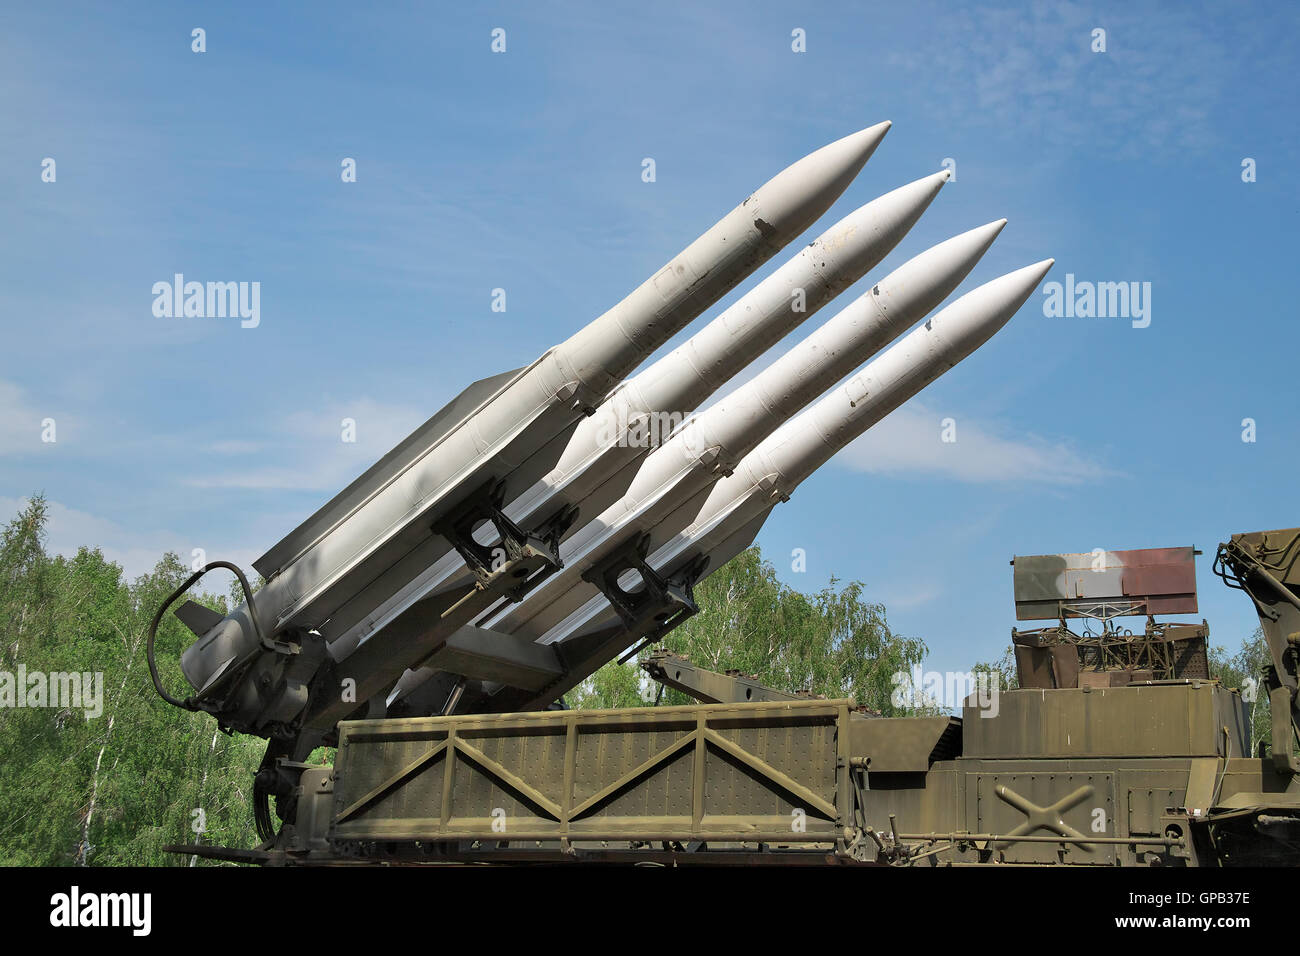 Air defense missiles on position against blue sky Stock Photo